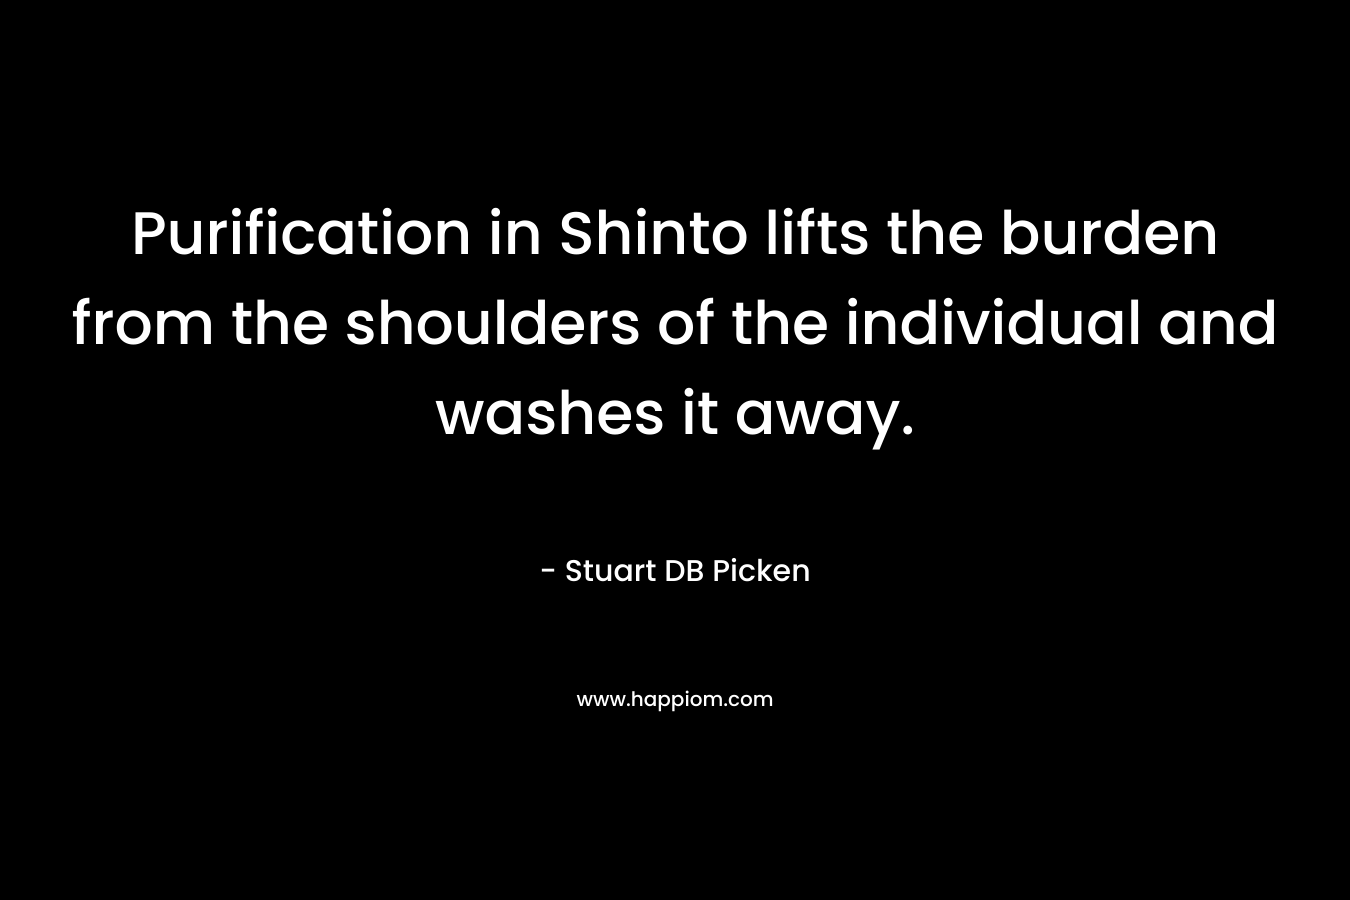 Purification in Shinto lifts the burden from the shoulders of the individual and washes it away.